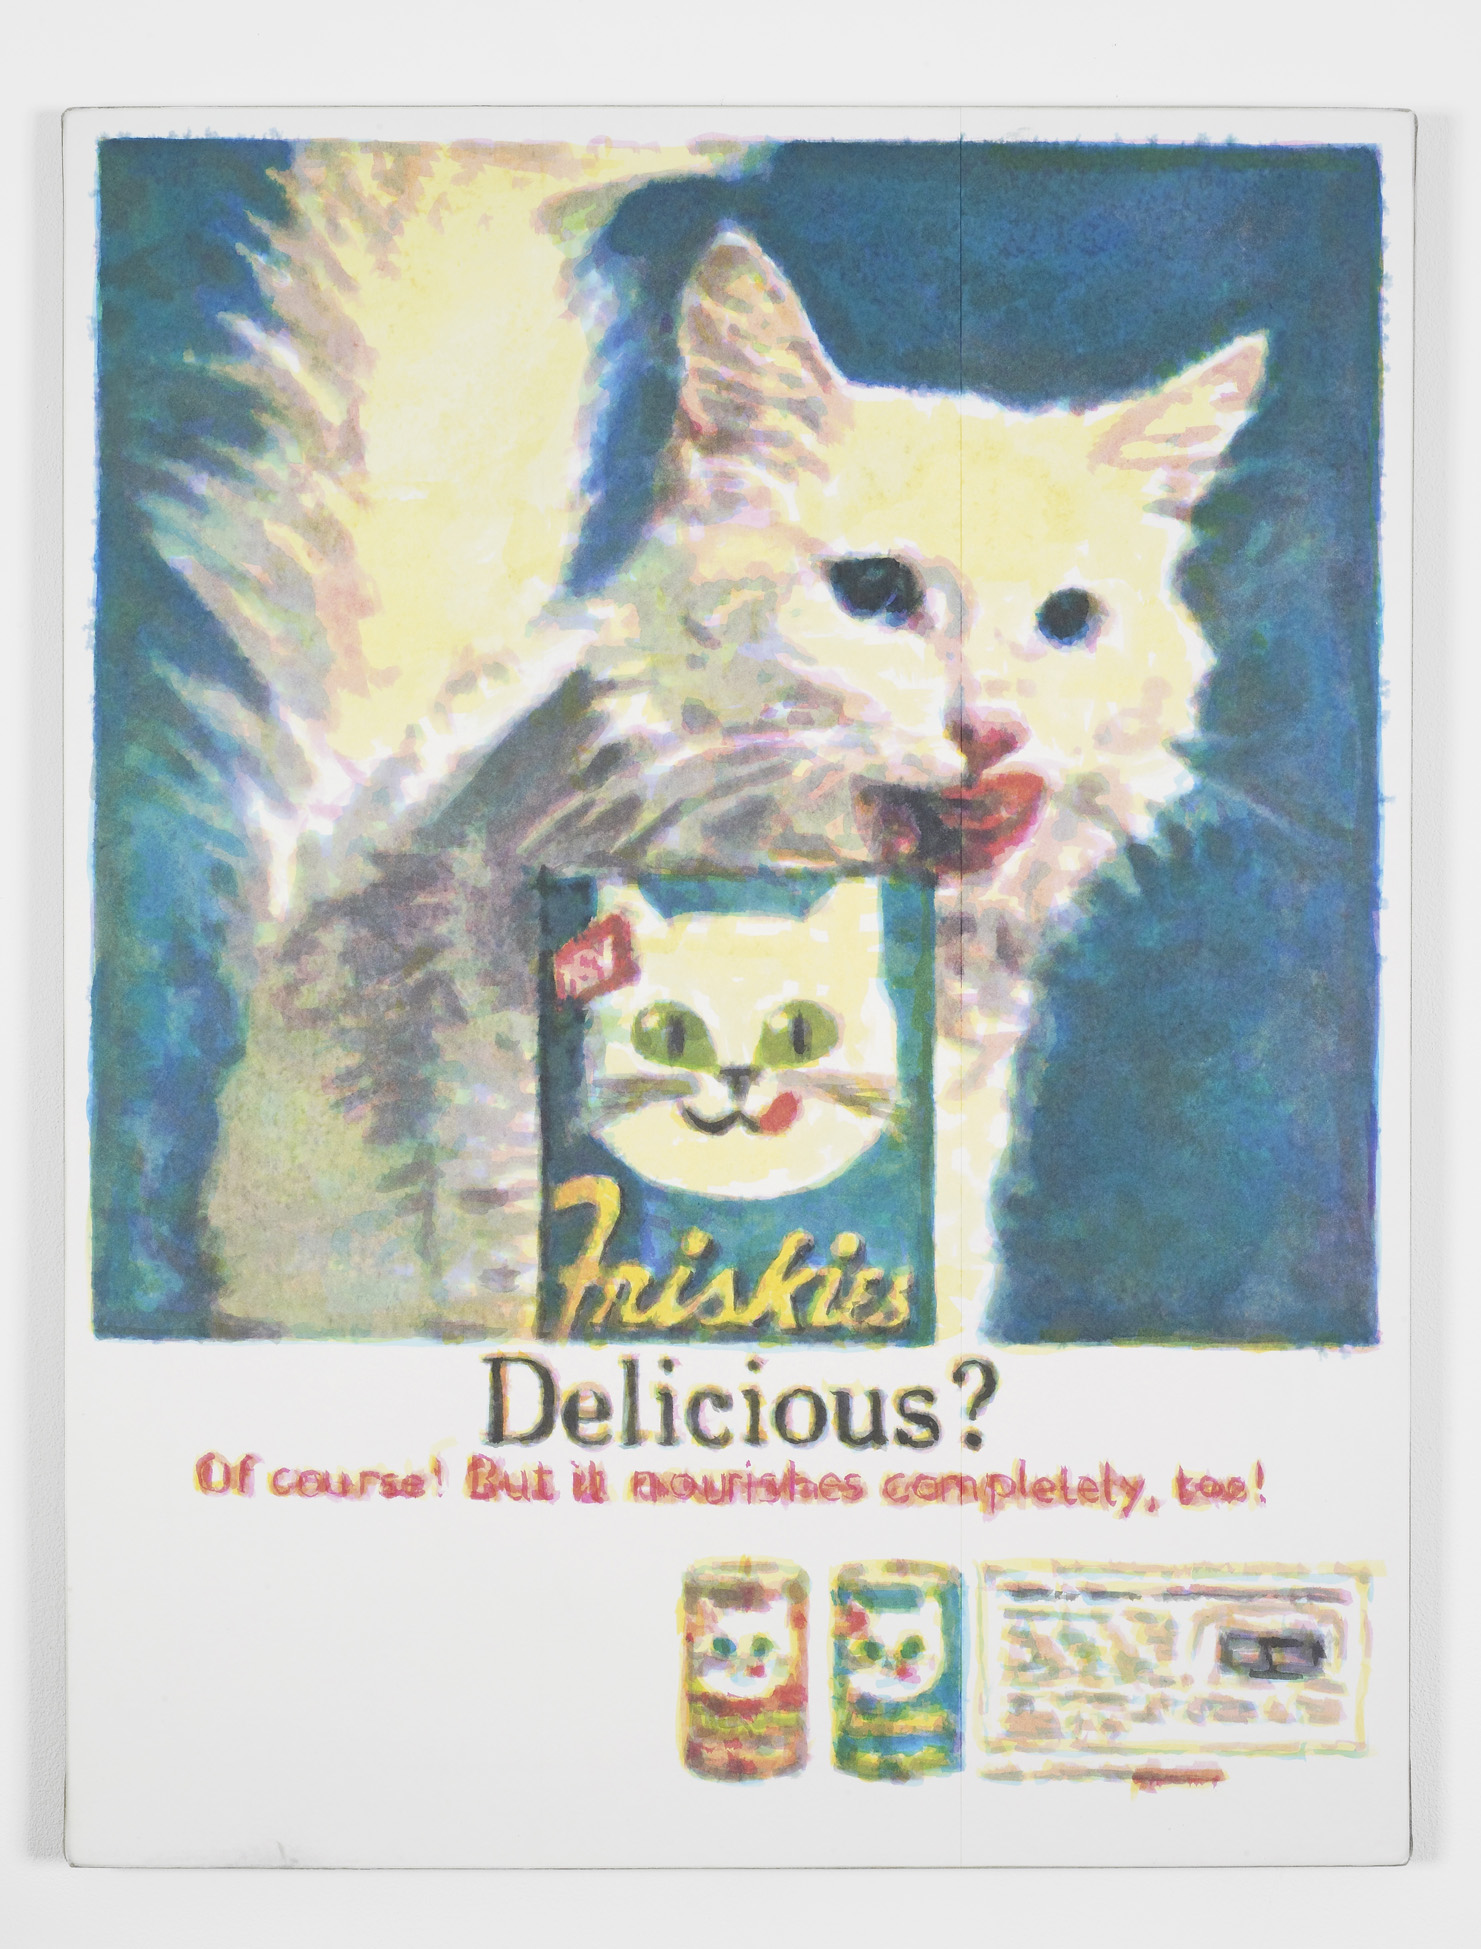     Delicious (1970’s)  2014  Hand-painted inkjet inks on fibre paper and linen  110 x 80 cm / 43.3 x 31.4 in 